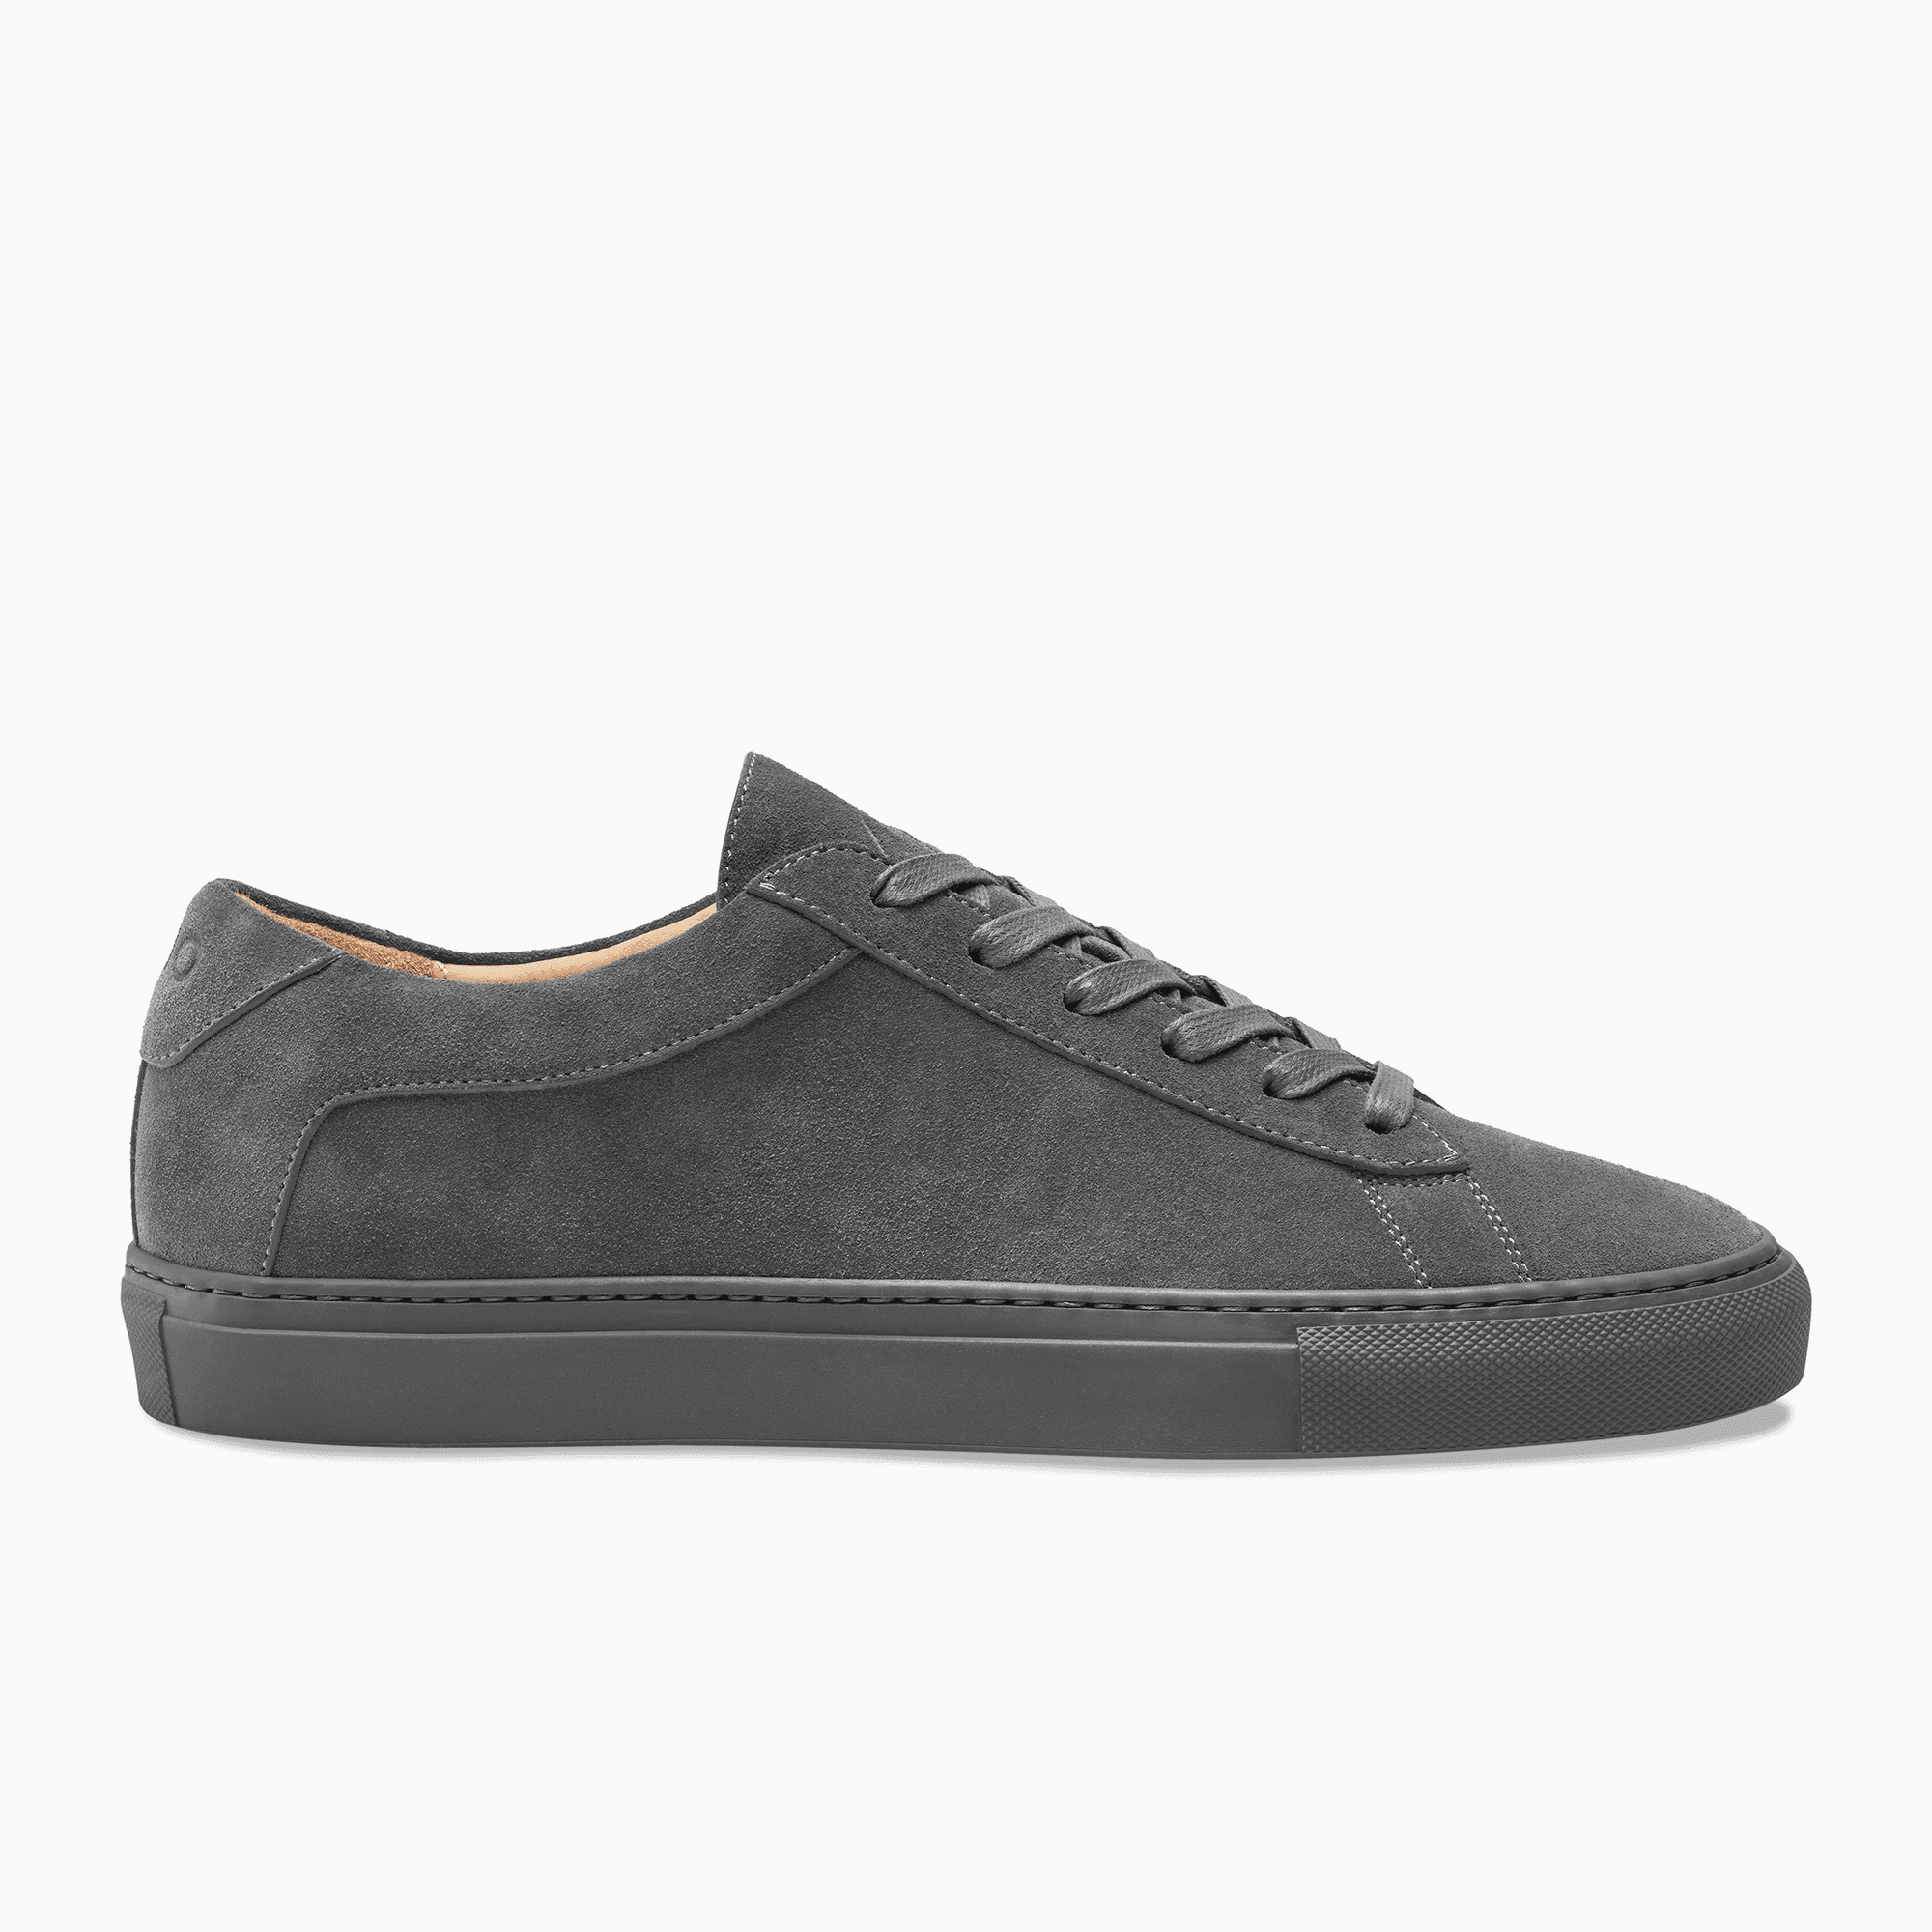 gray suede shoes women's